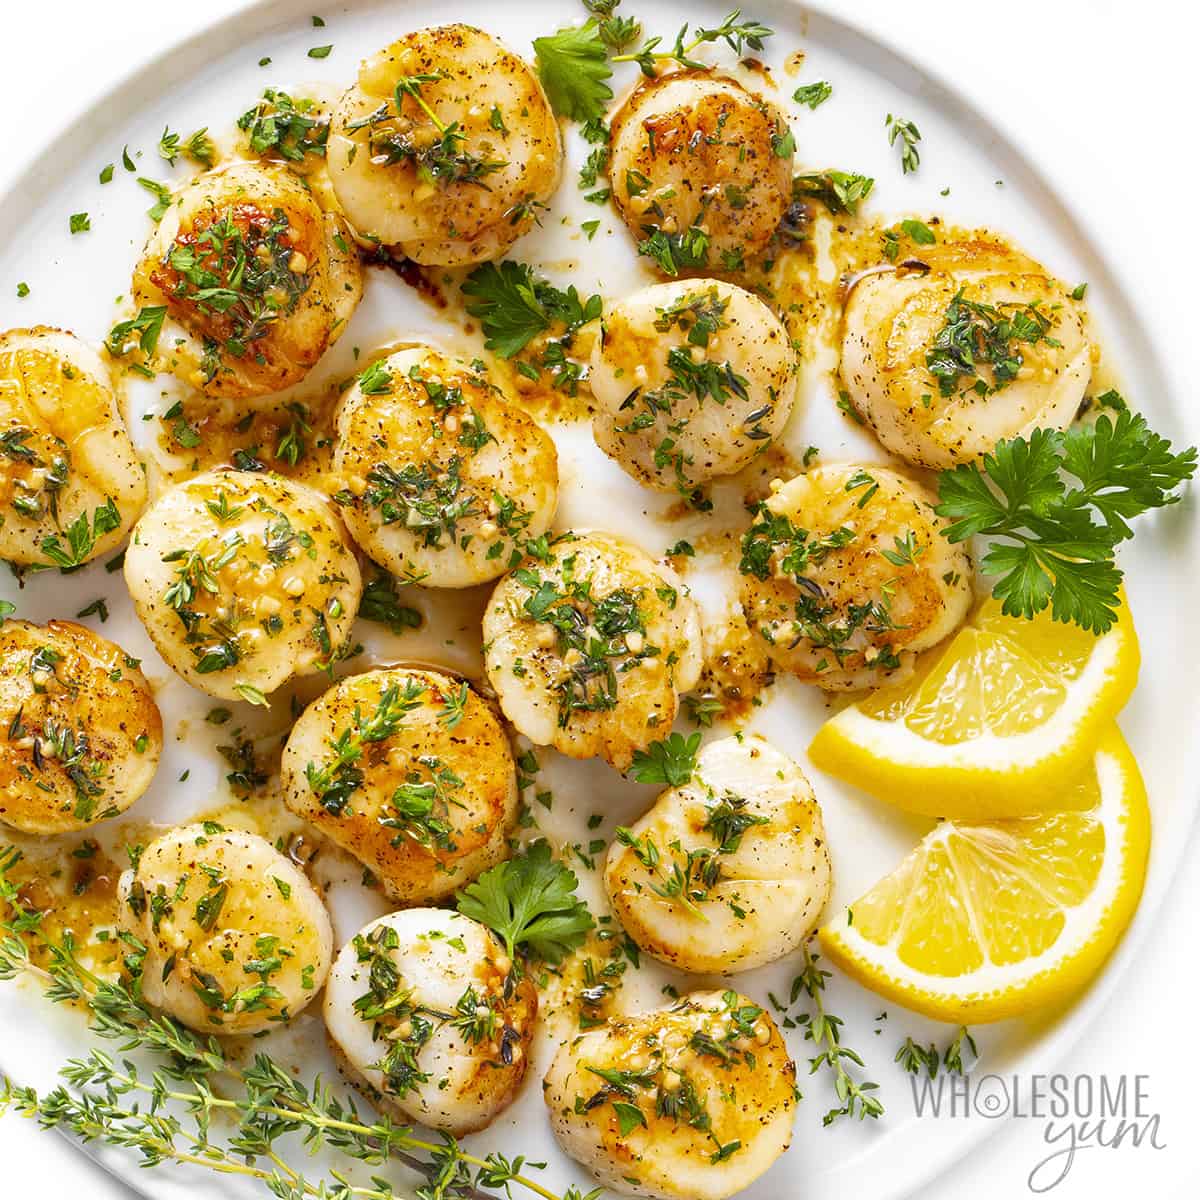 Plate of pan seared callops with parsley and lemon slices.